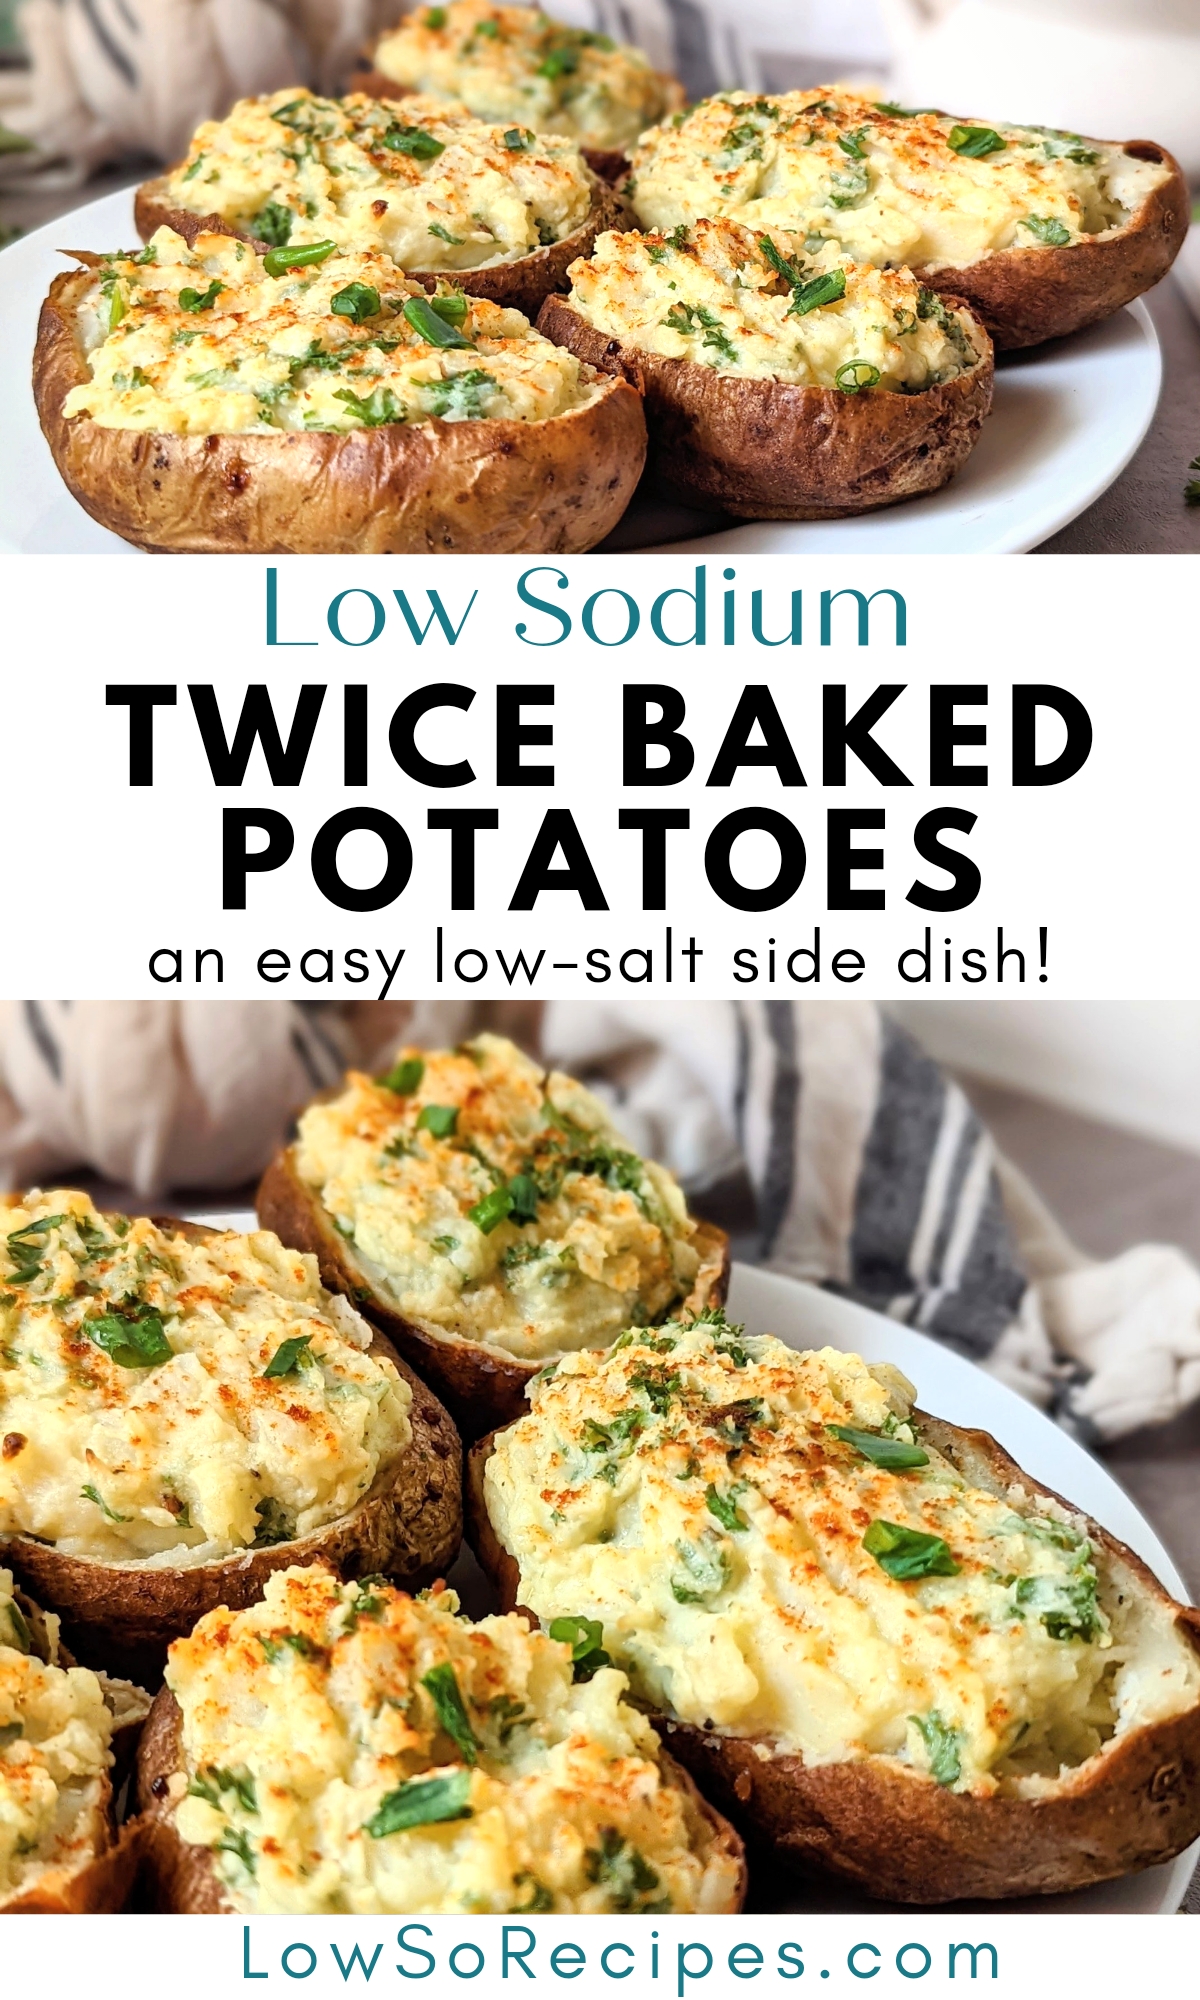 low sodium twice baked potatoes recipe with garlic mashed potatoes low salt side dishes easy no salt added potato recipes